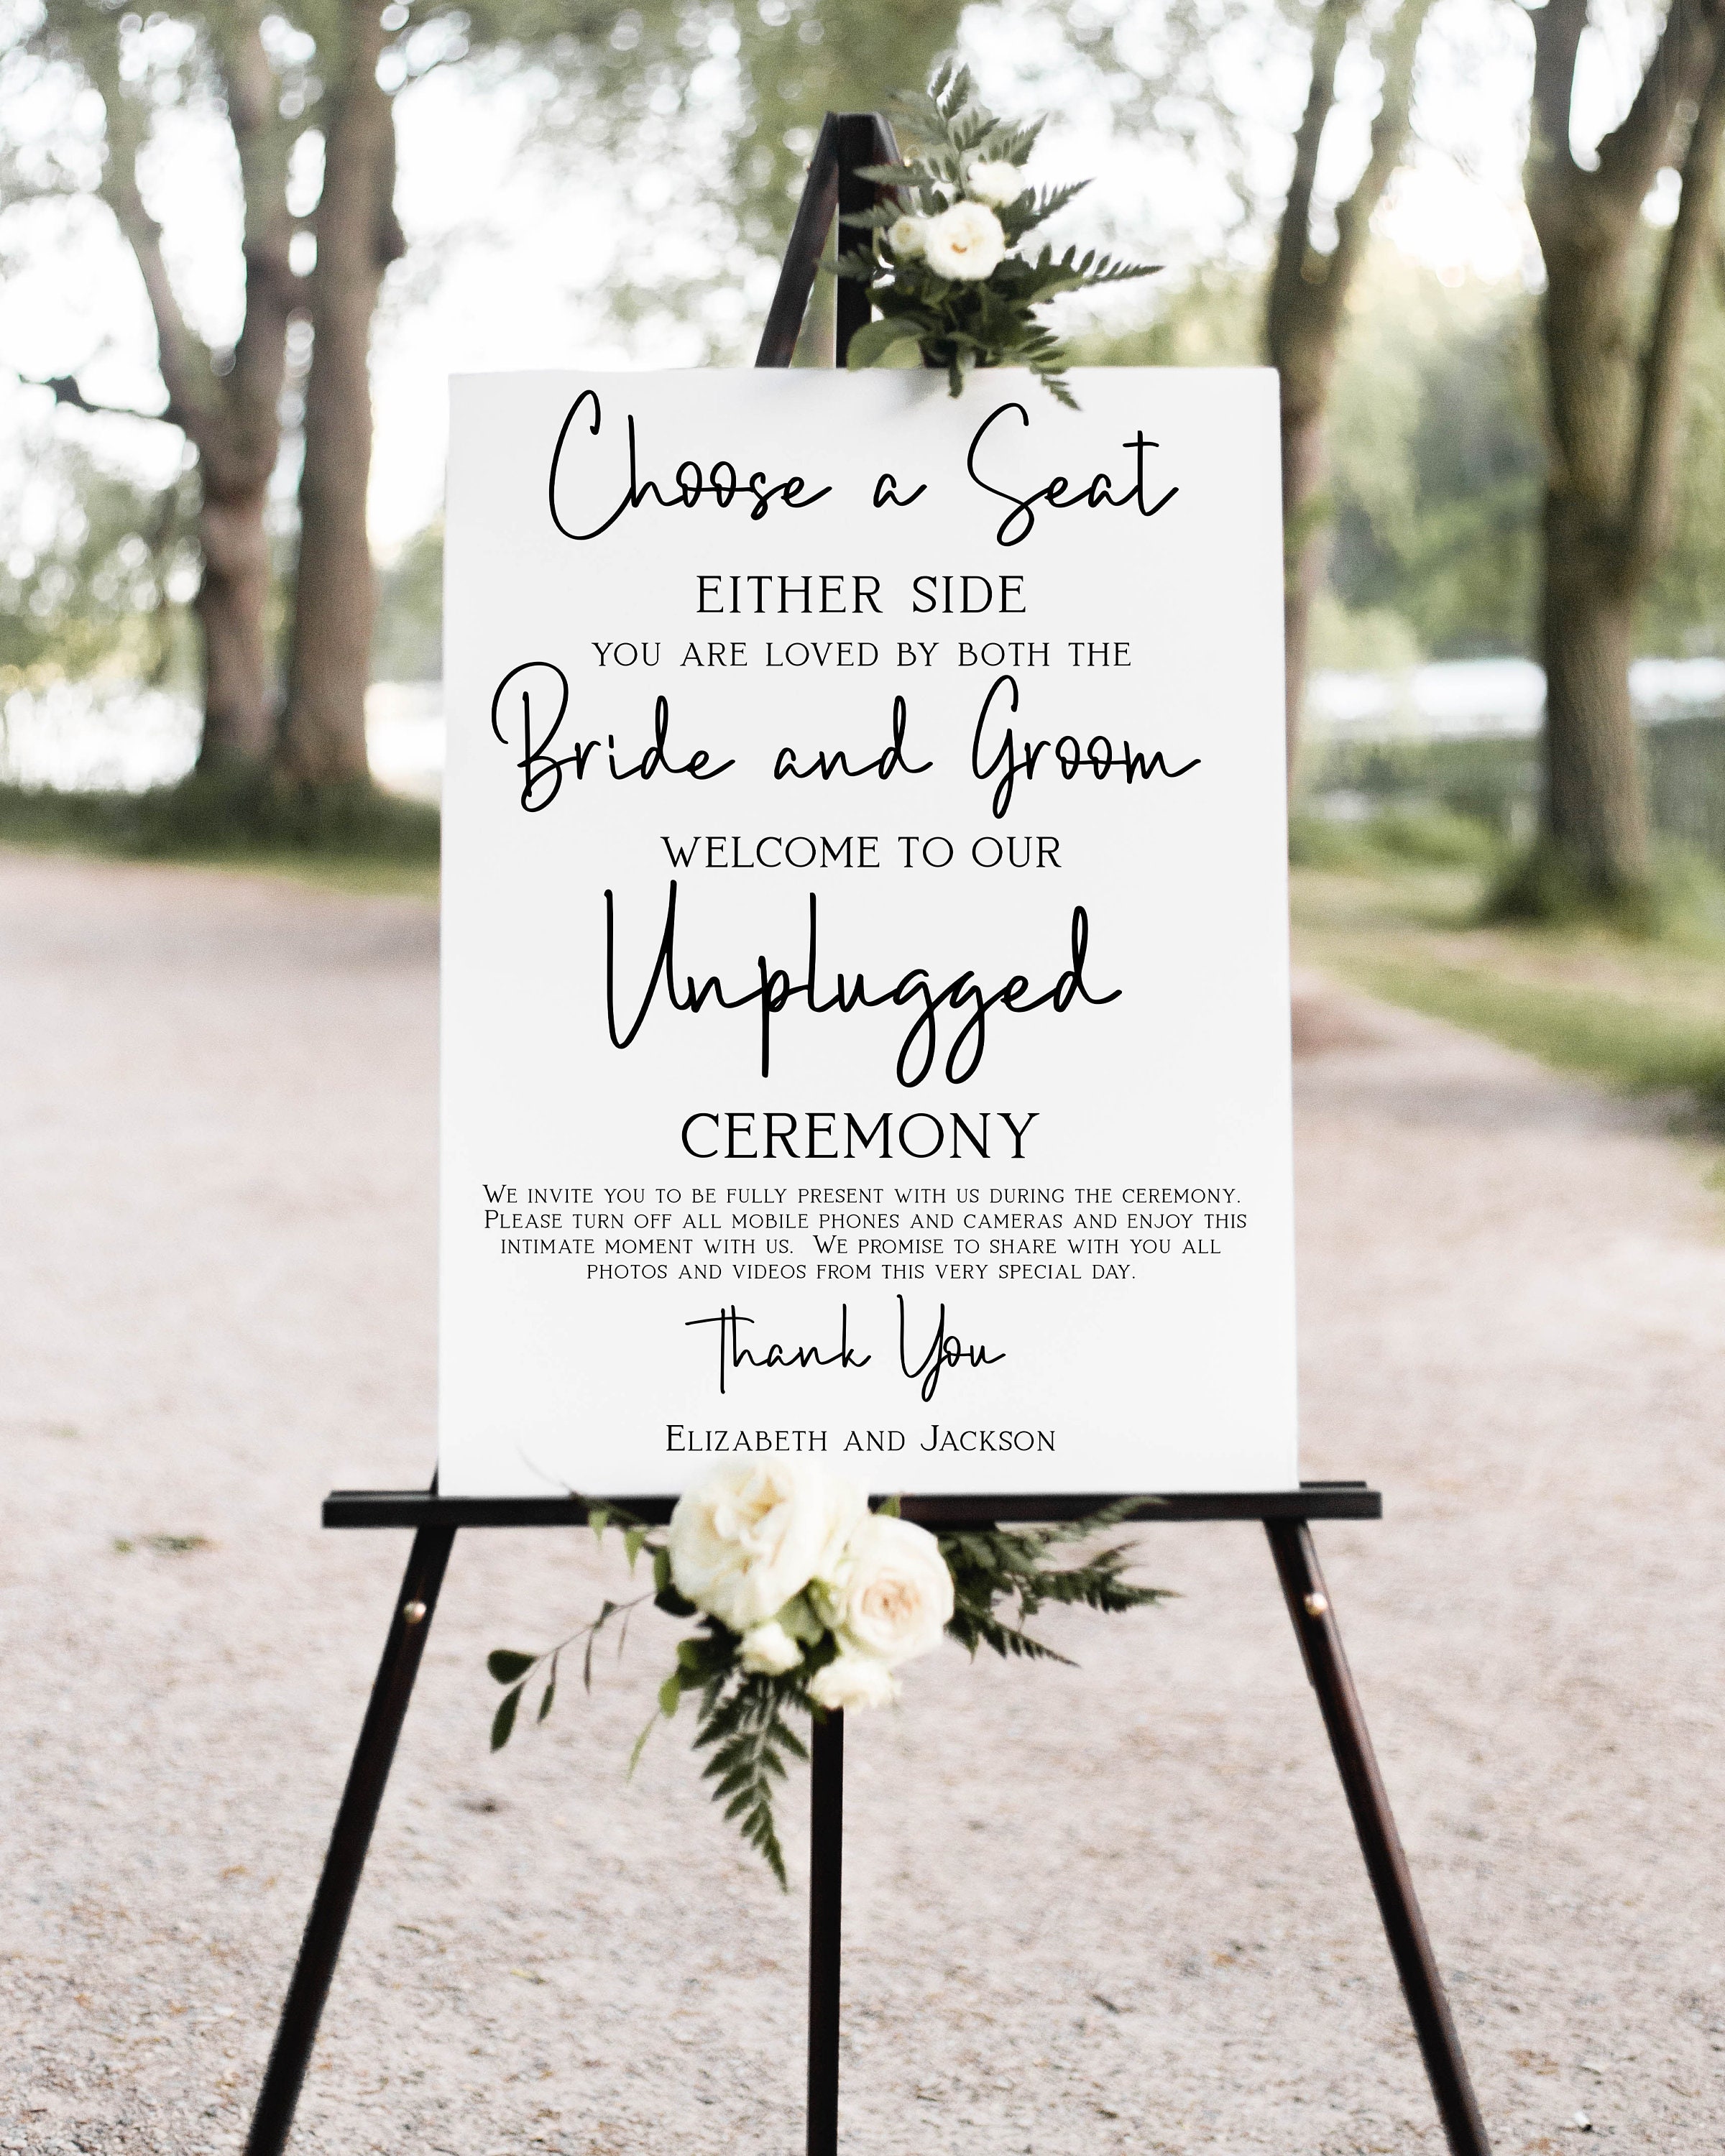 Party Rental Wedding Ceremony 'Pick a Seat Not a Side' Sign - SW